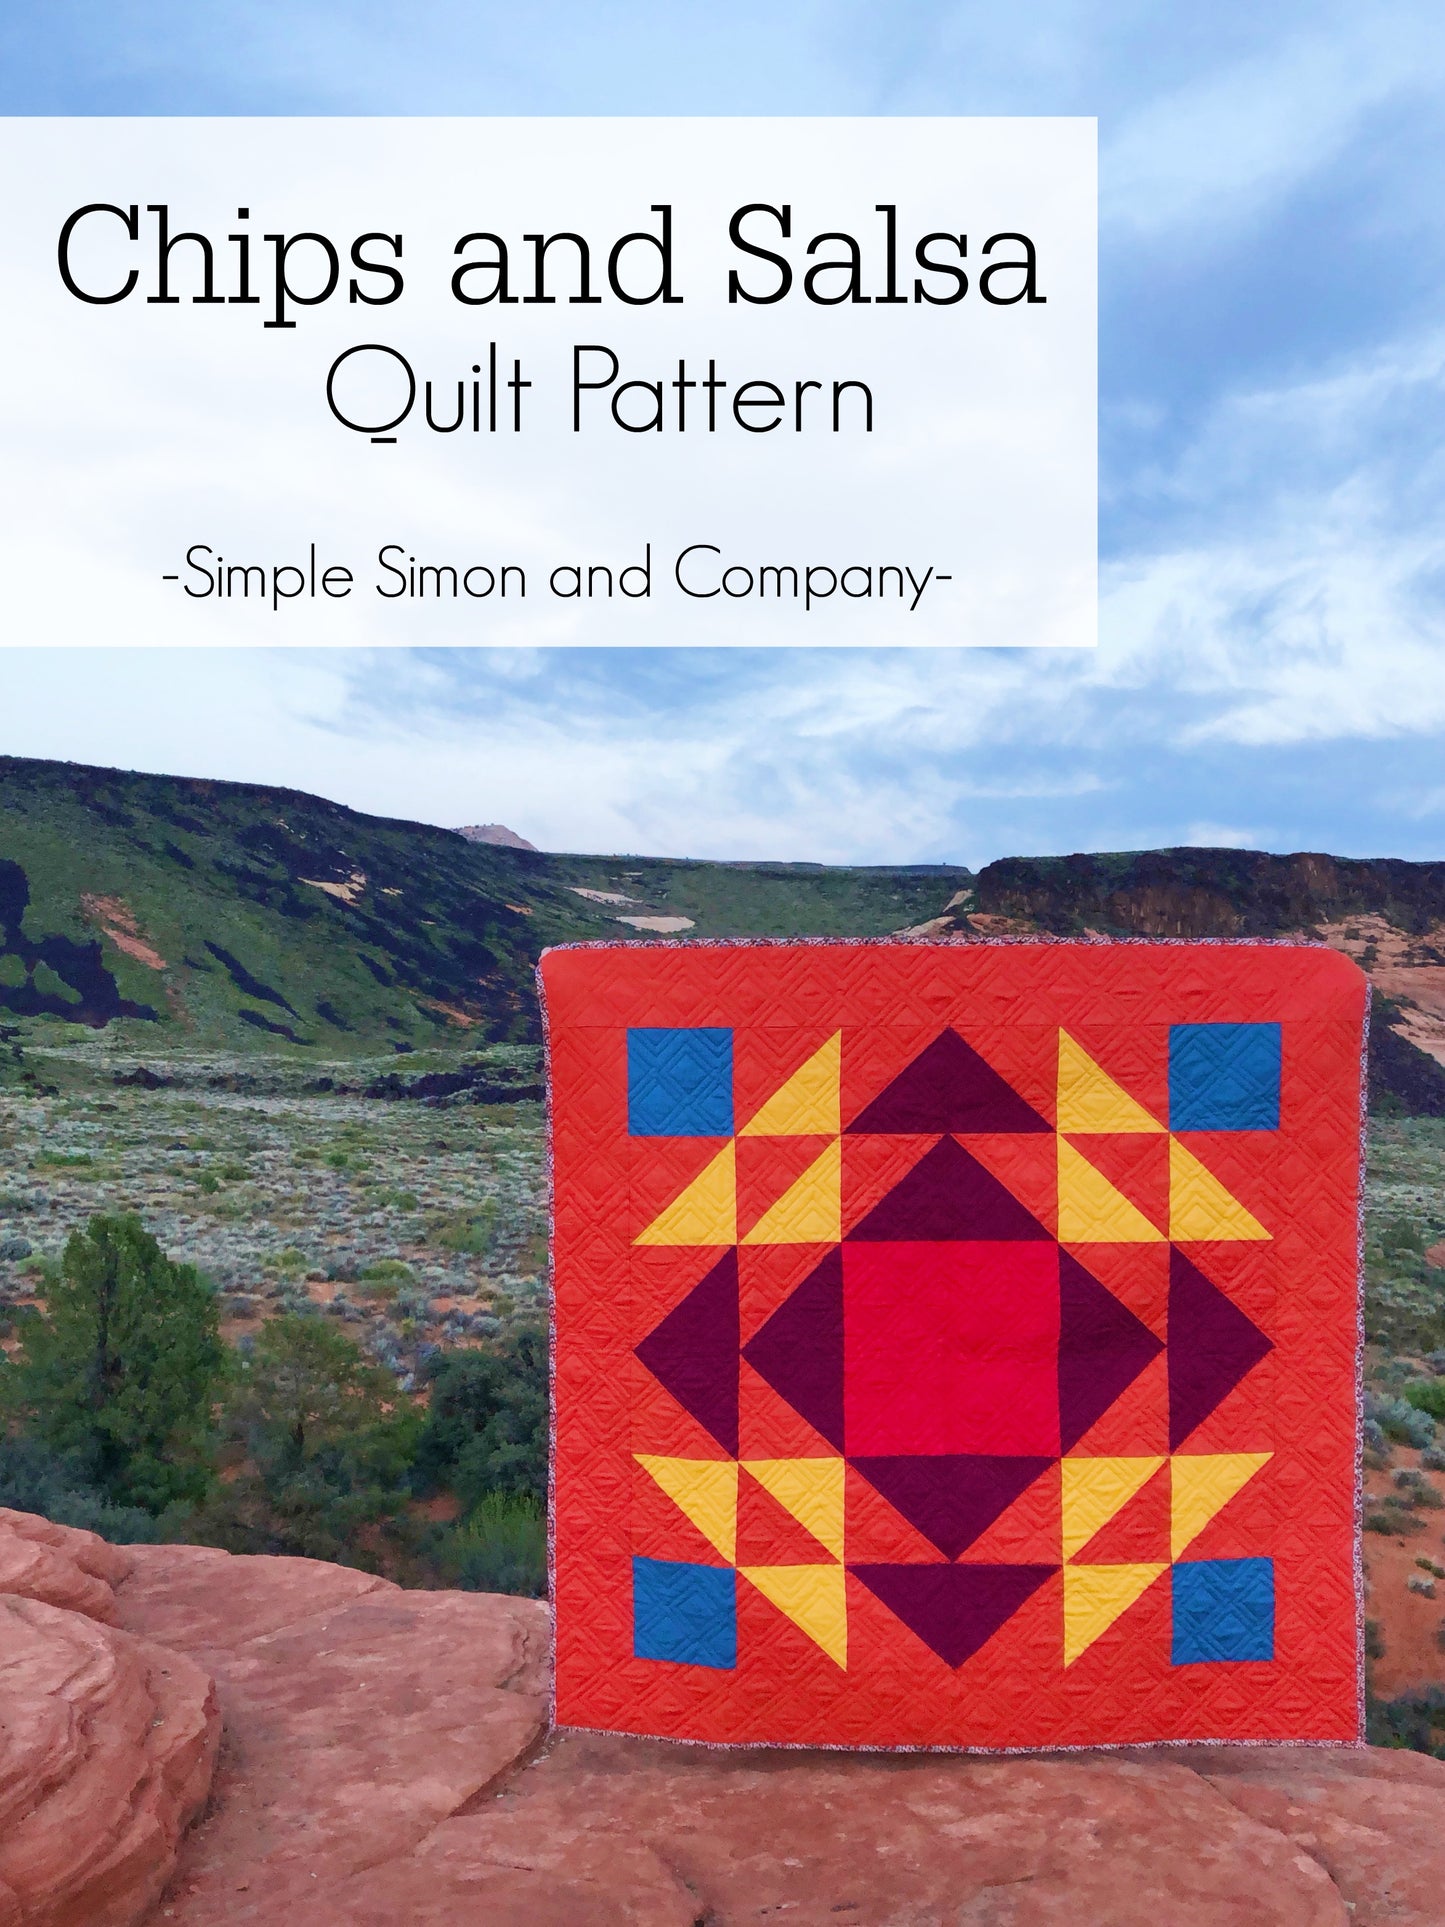 PATTERN (PDF): The Chips and Salsa Quilt (Immediate Download)